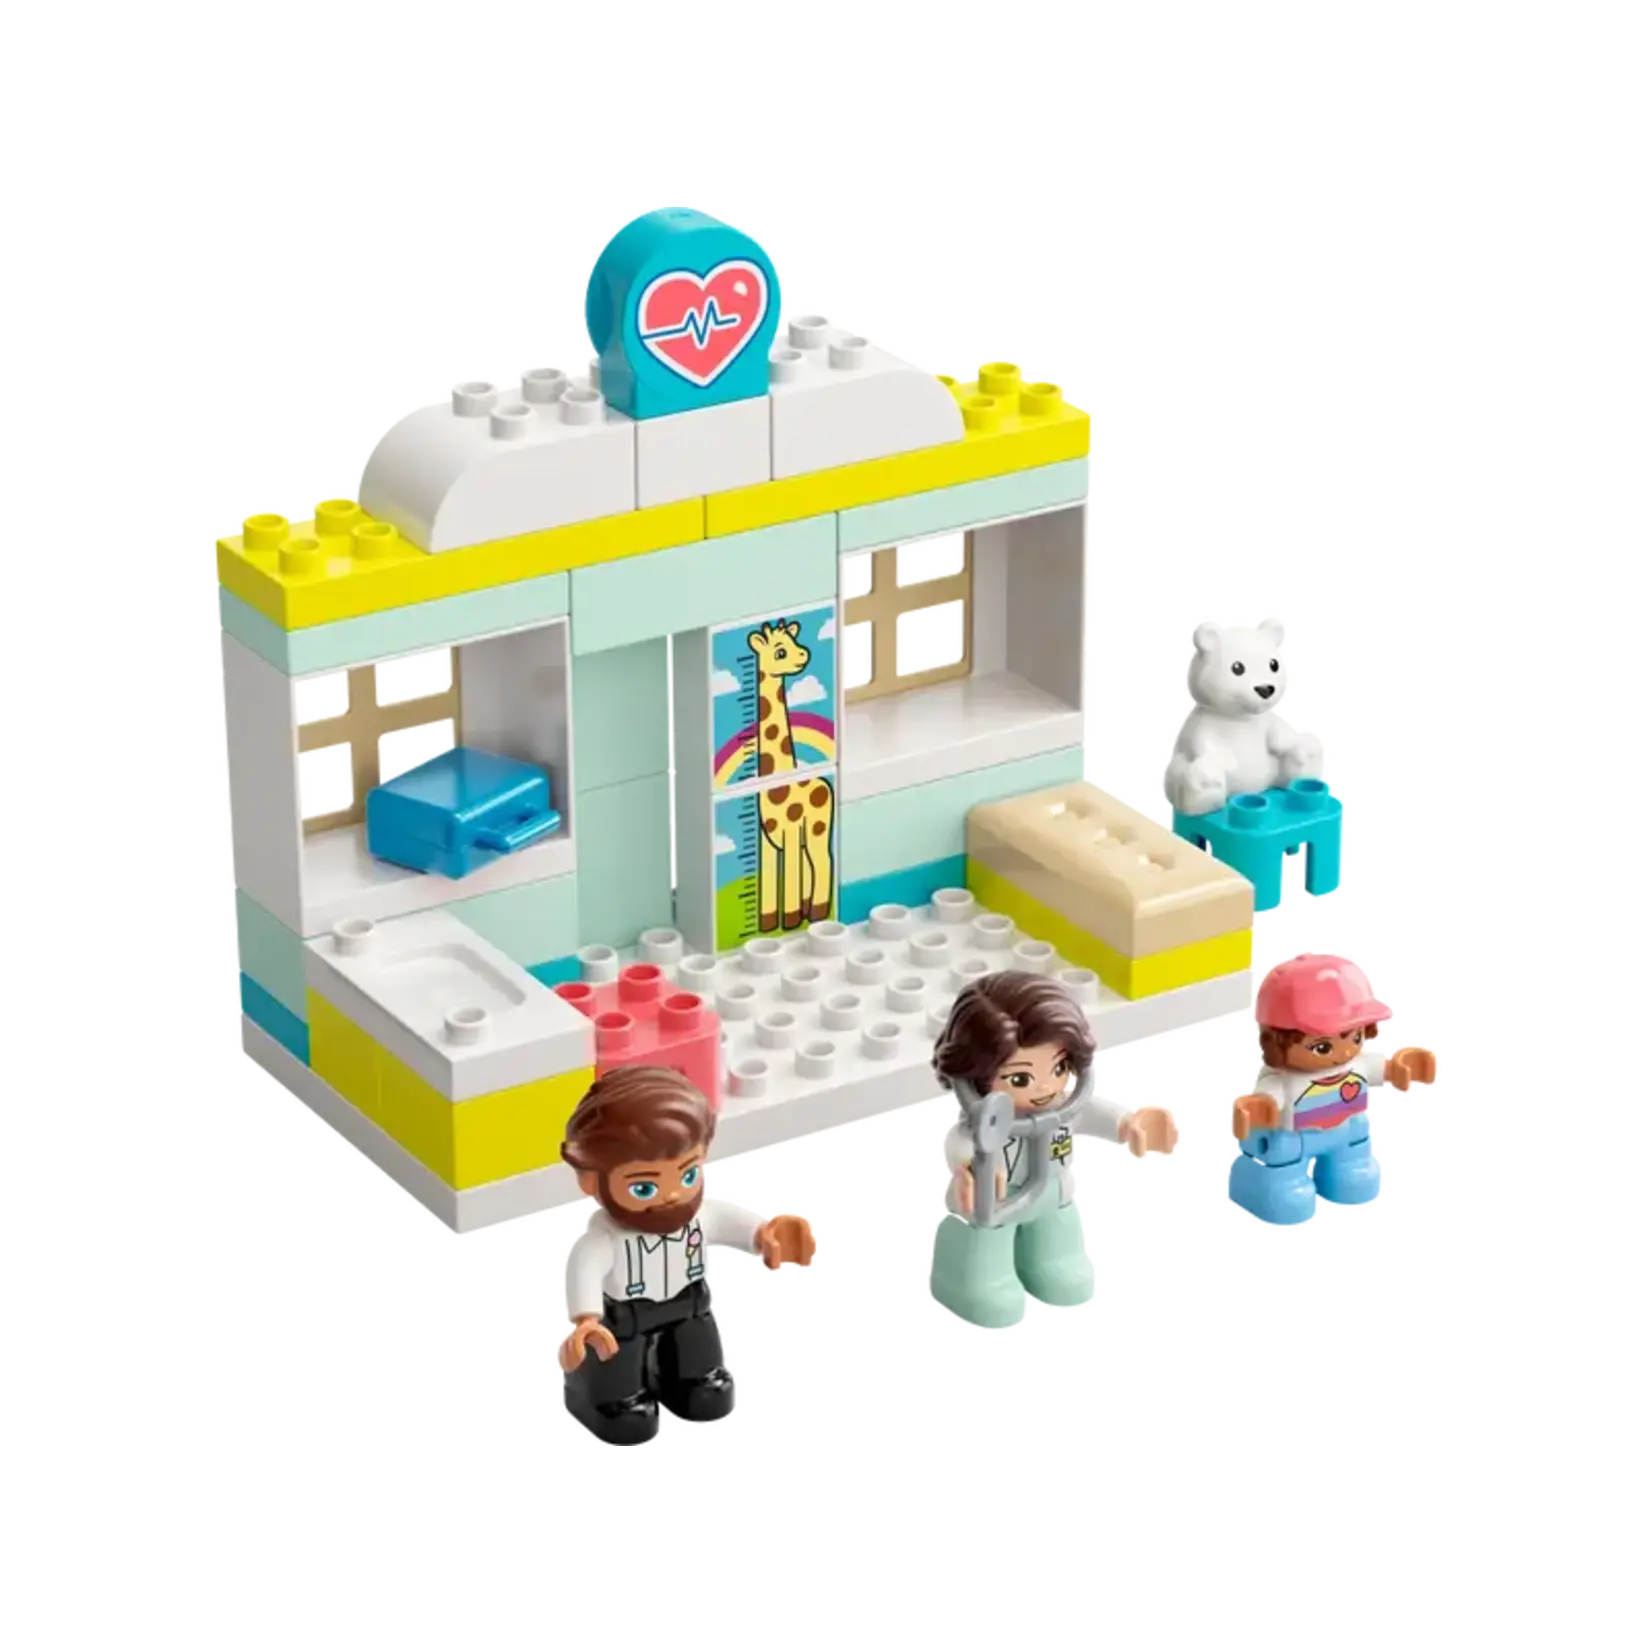 LEGO DUPLO - At the doctor's